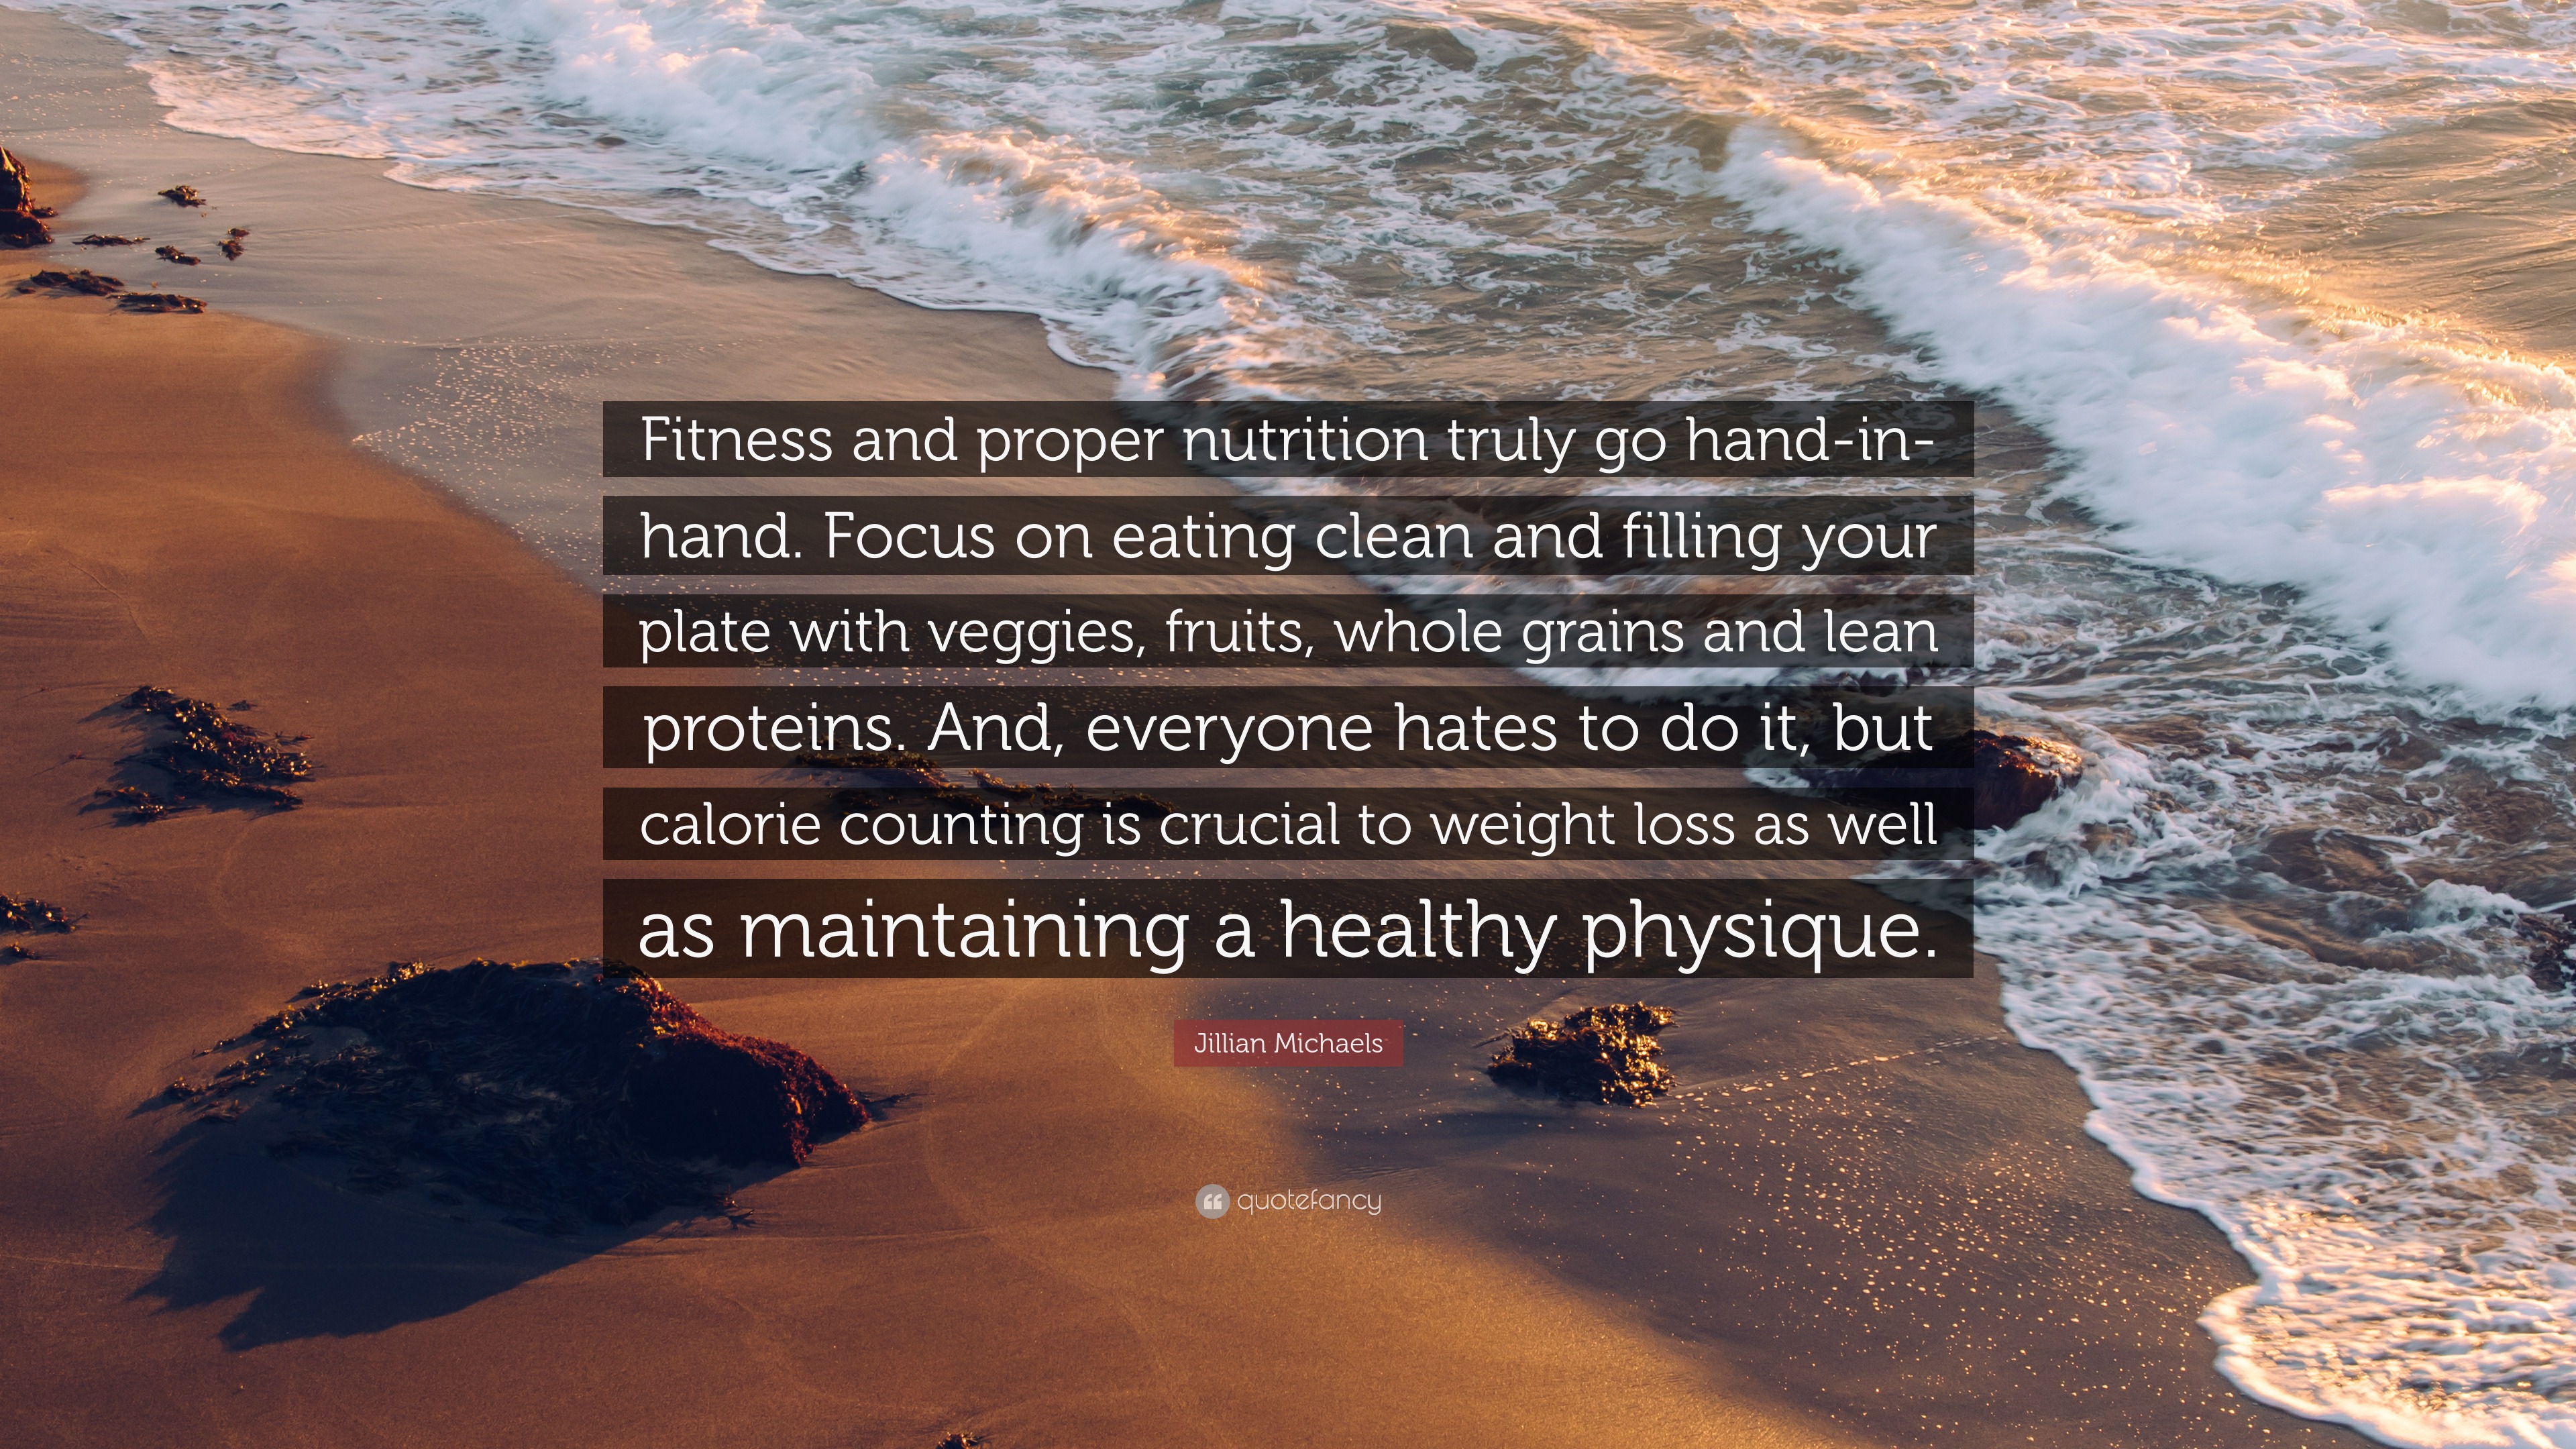 Jillian Michaels Quote: “Fitness and proper nutrition truly go  hand-in-hand. Focus on eating clean and filling your plate with veggies,  fruits, w...”